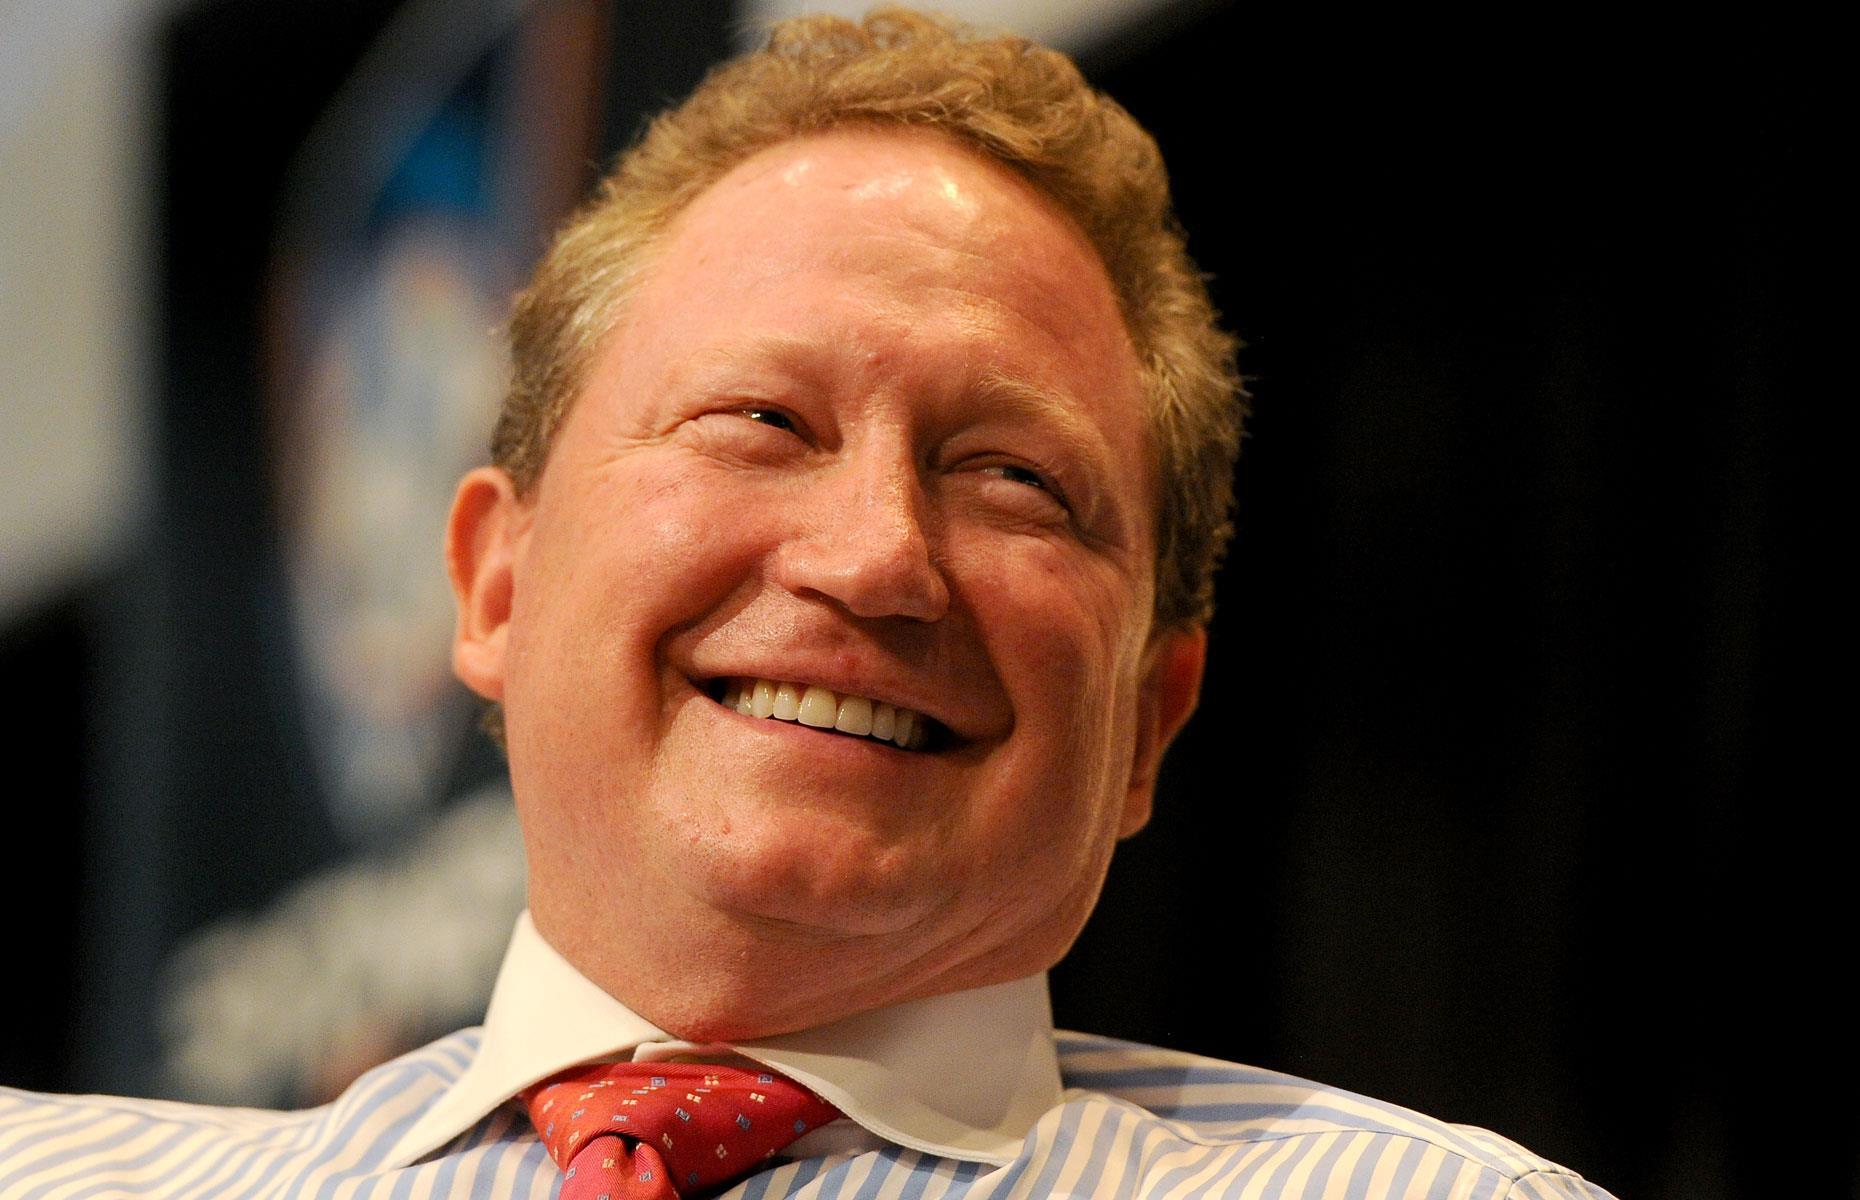 17th. Andrew 'Twiggy' Forrest: 1.934 million hectares